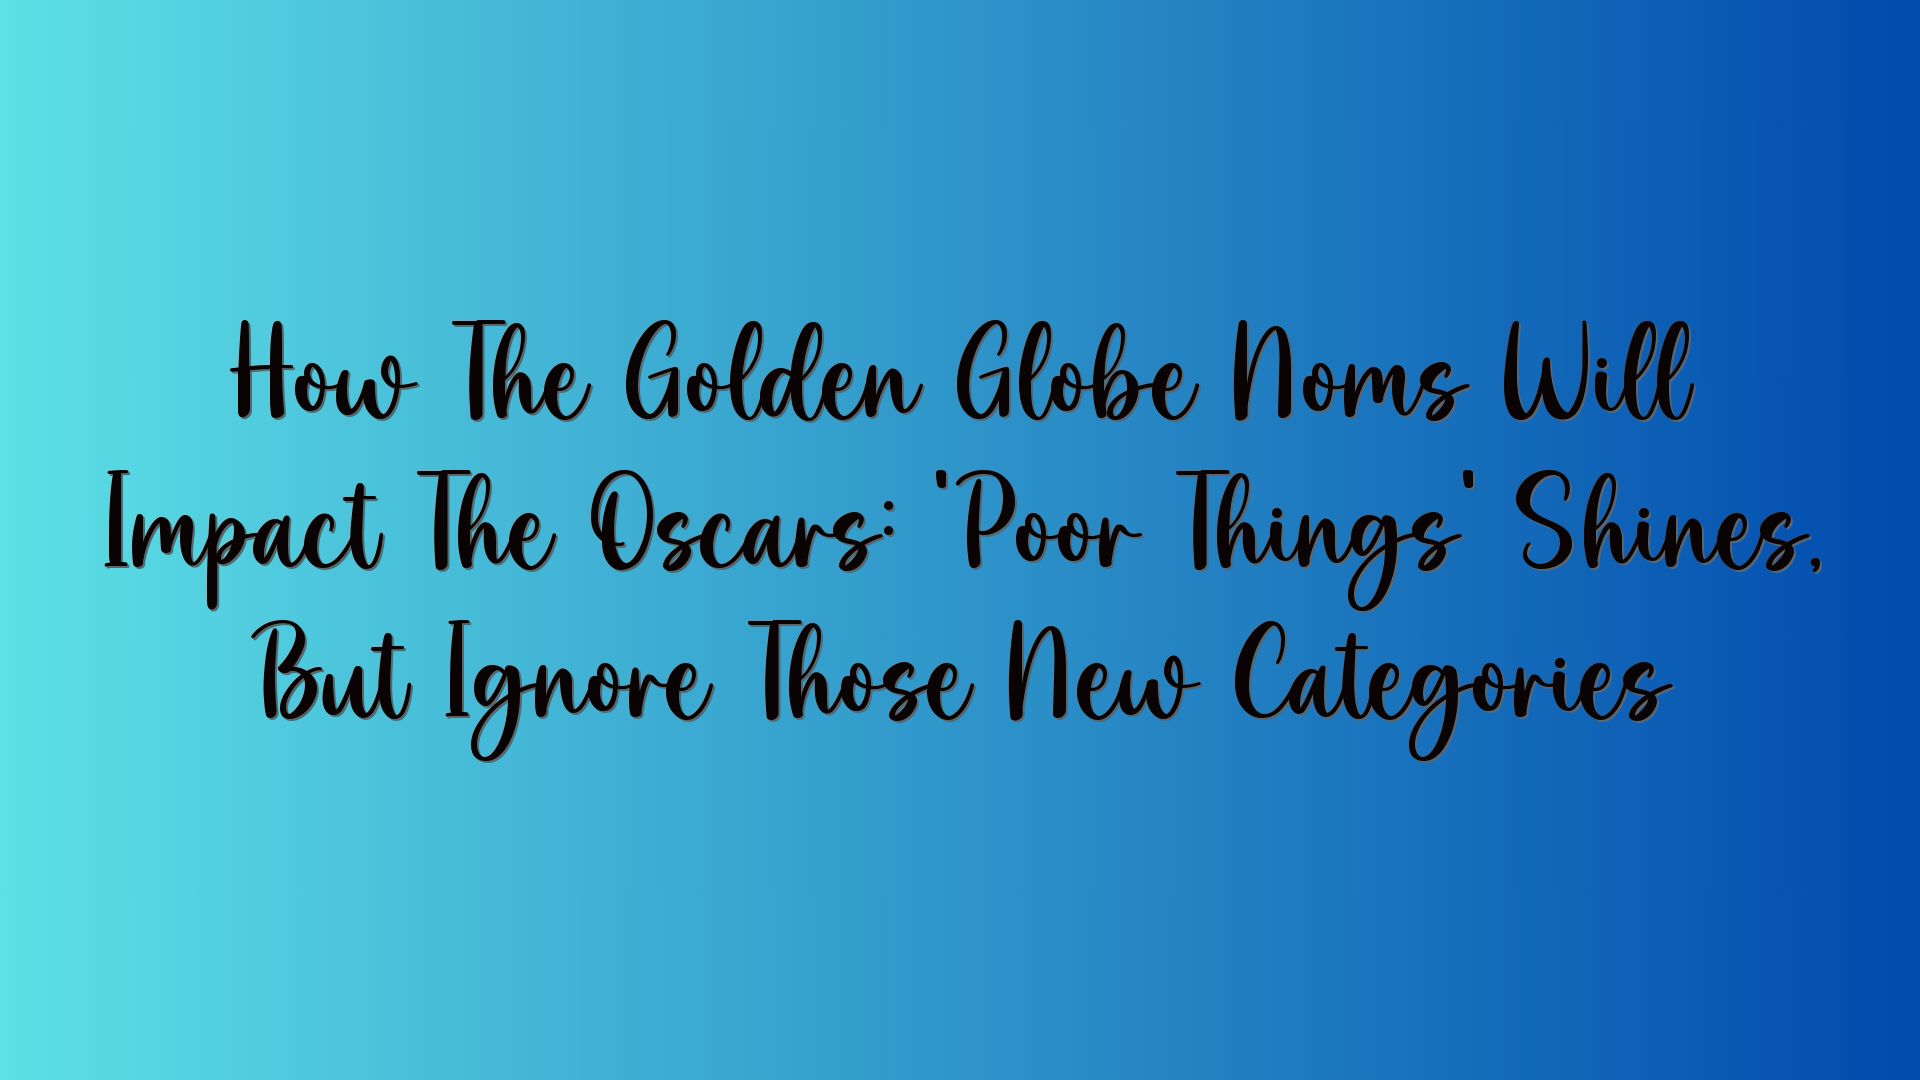 How The Golden Globe Noms Will Impact The Oscars: ‘Poor Things’ Shines, But Ignore Those New Categories